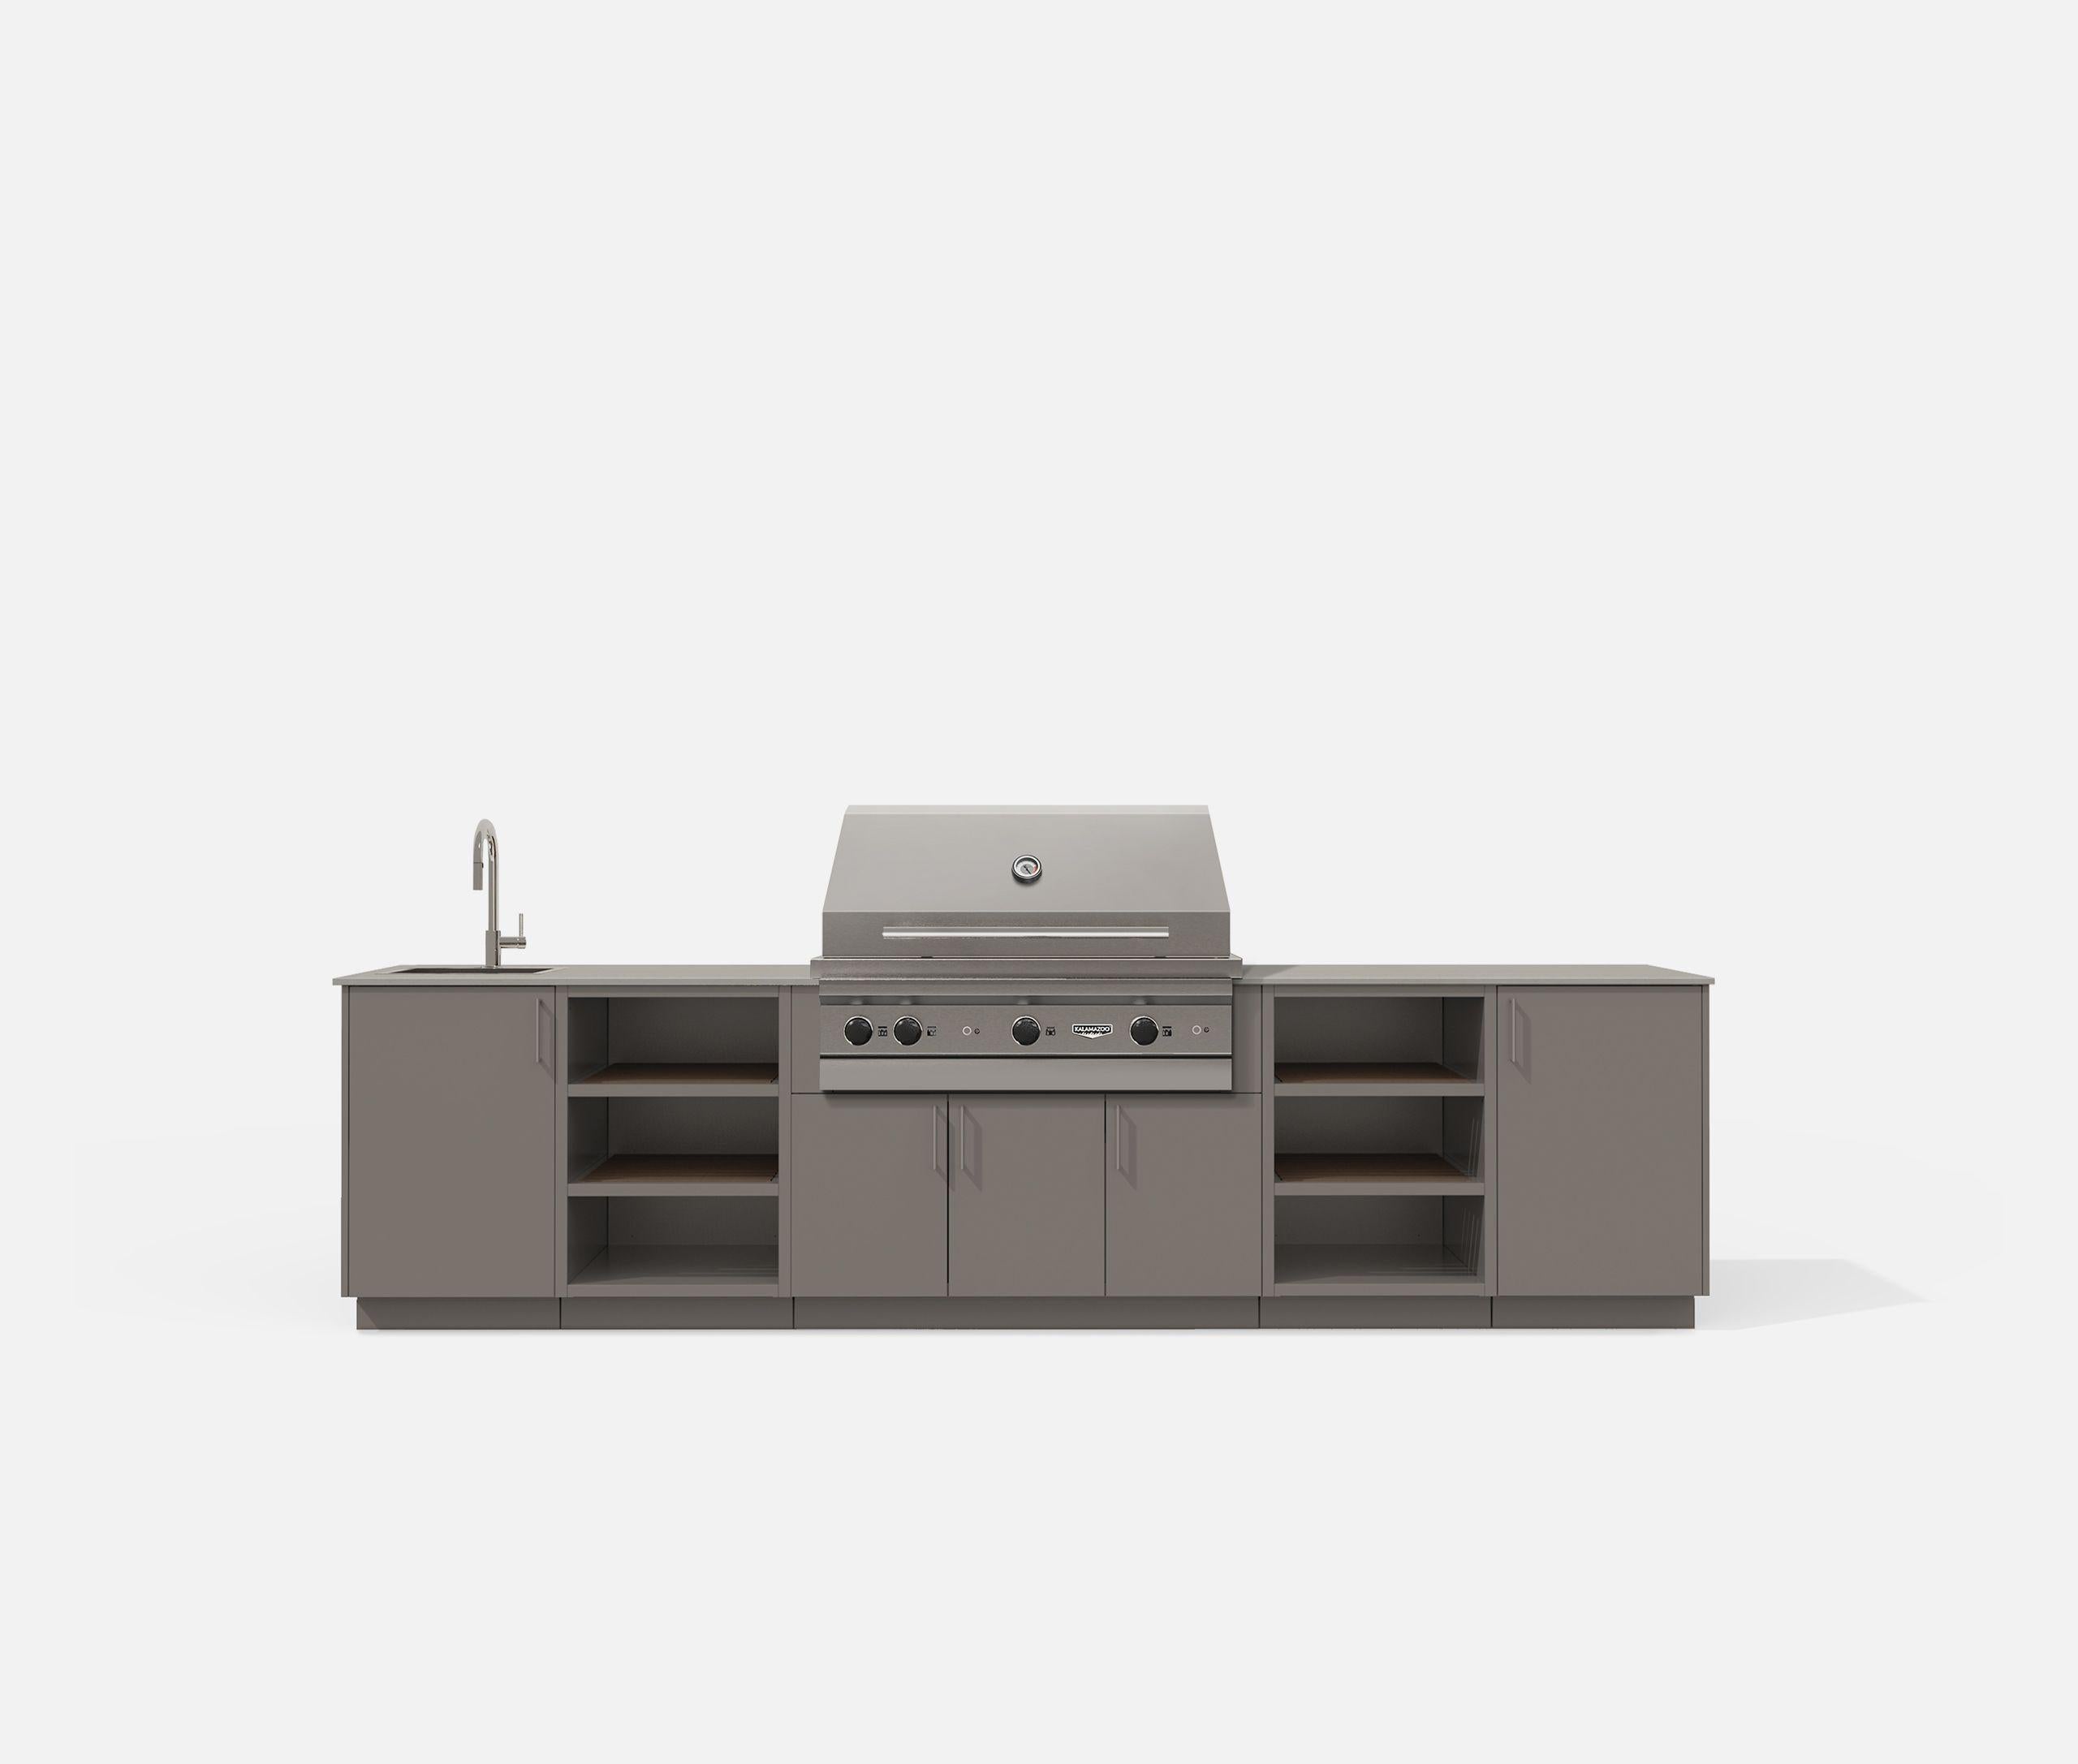 Urban Bonfire CTWILIGHT42CLAY Twilight 42 Outdoor Kitchen (Clay) GRILL SOLD SEPARATELY